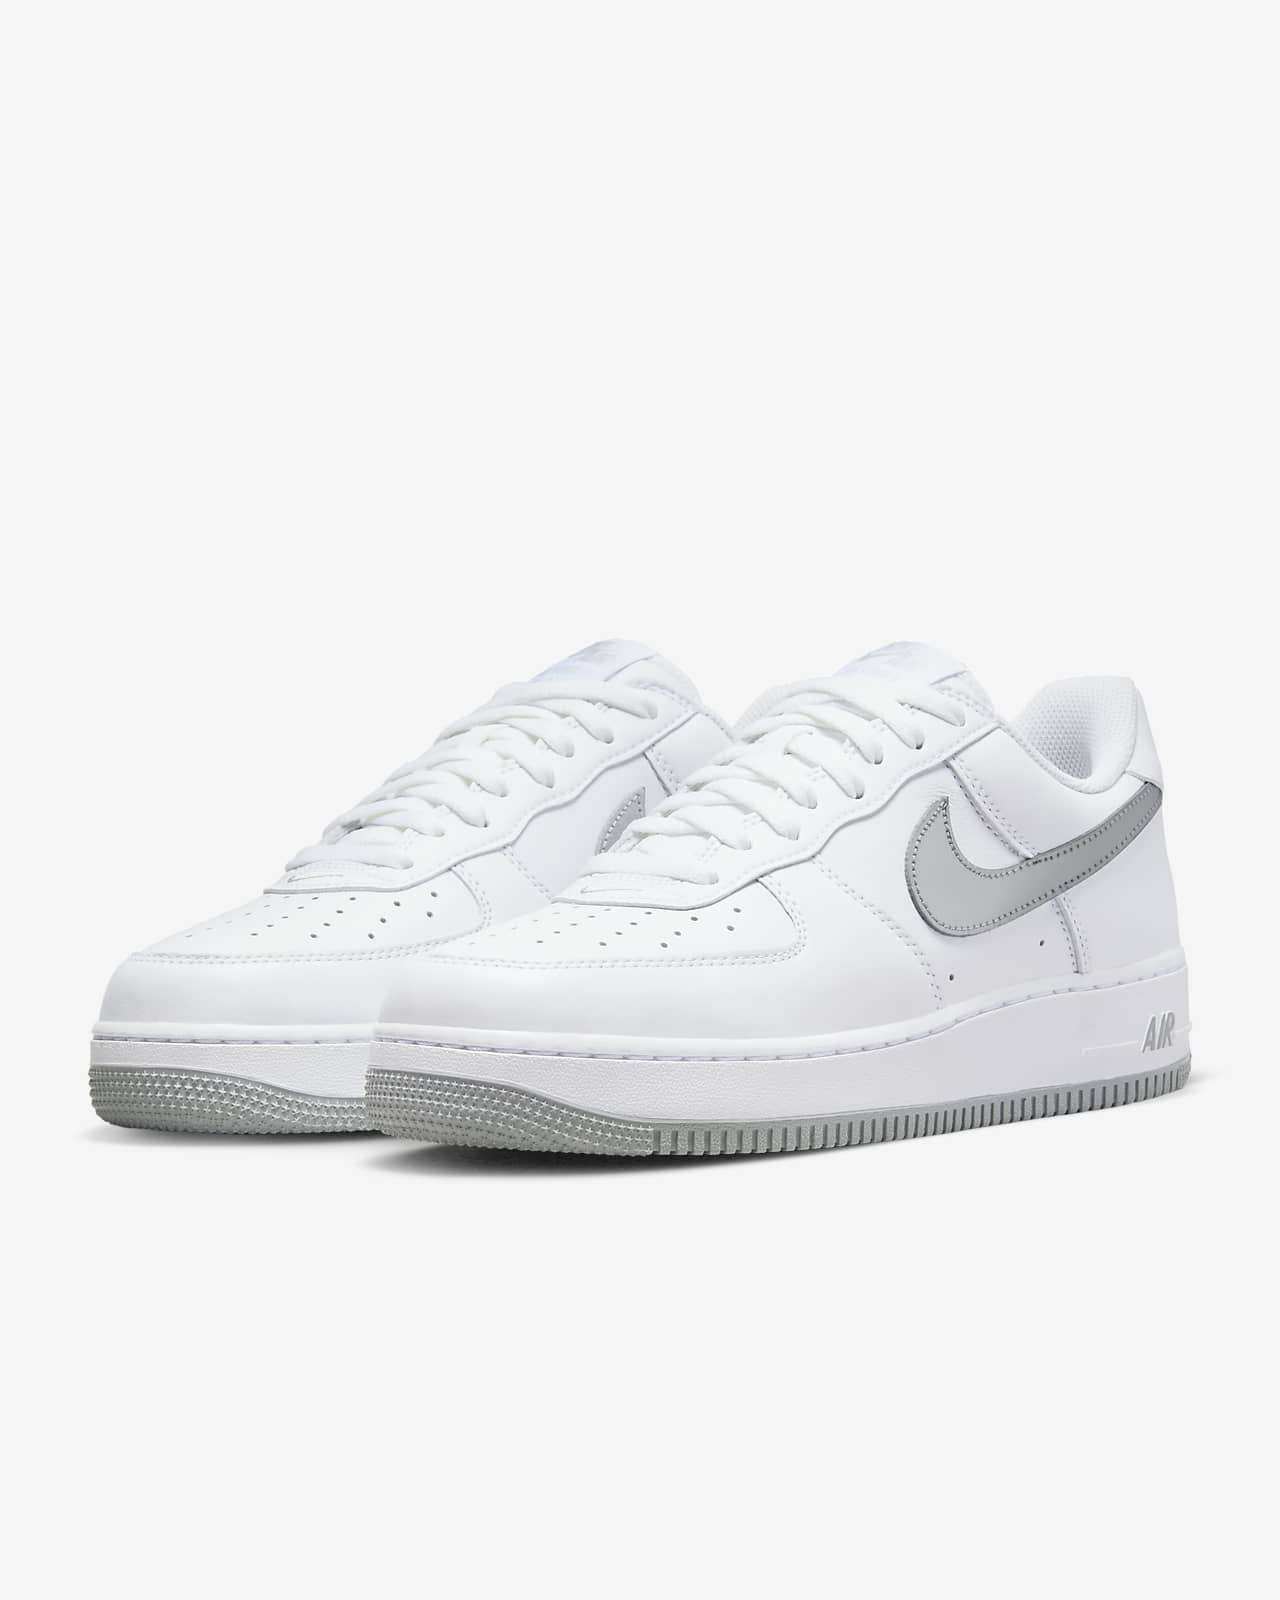 Stylish Nike Air Force 1 Low Top Sneaker White Shoes AF1 With Box Clearance  sell